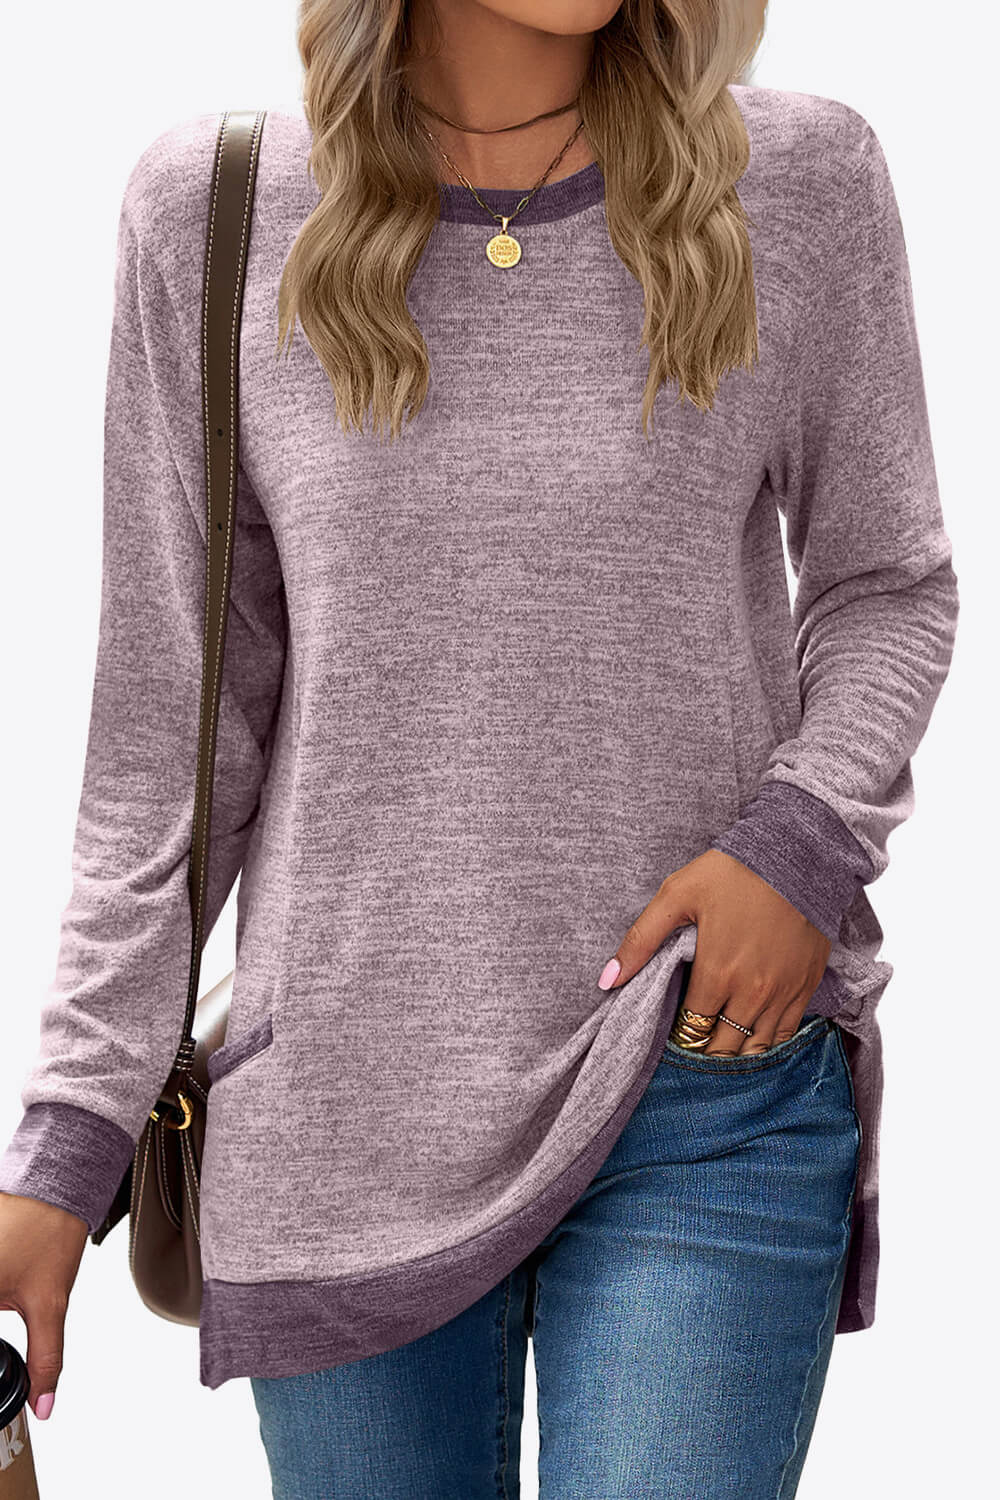 Heathered Slit Top with Pockets BLUE ZONE PLANET